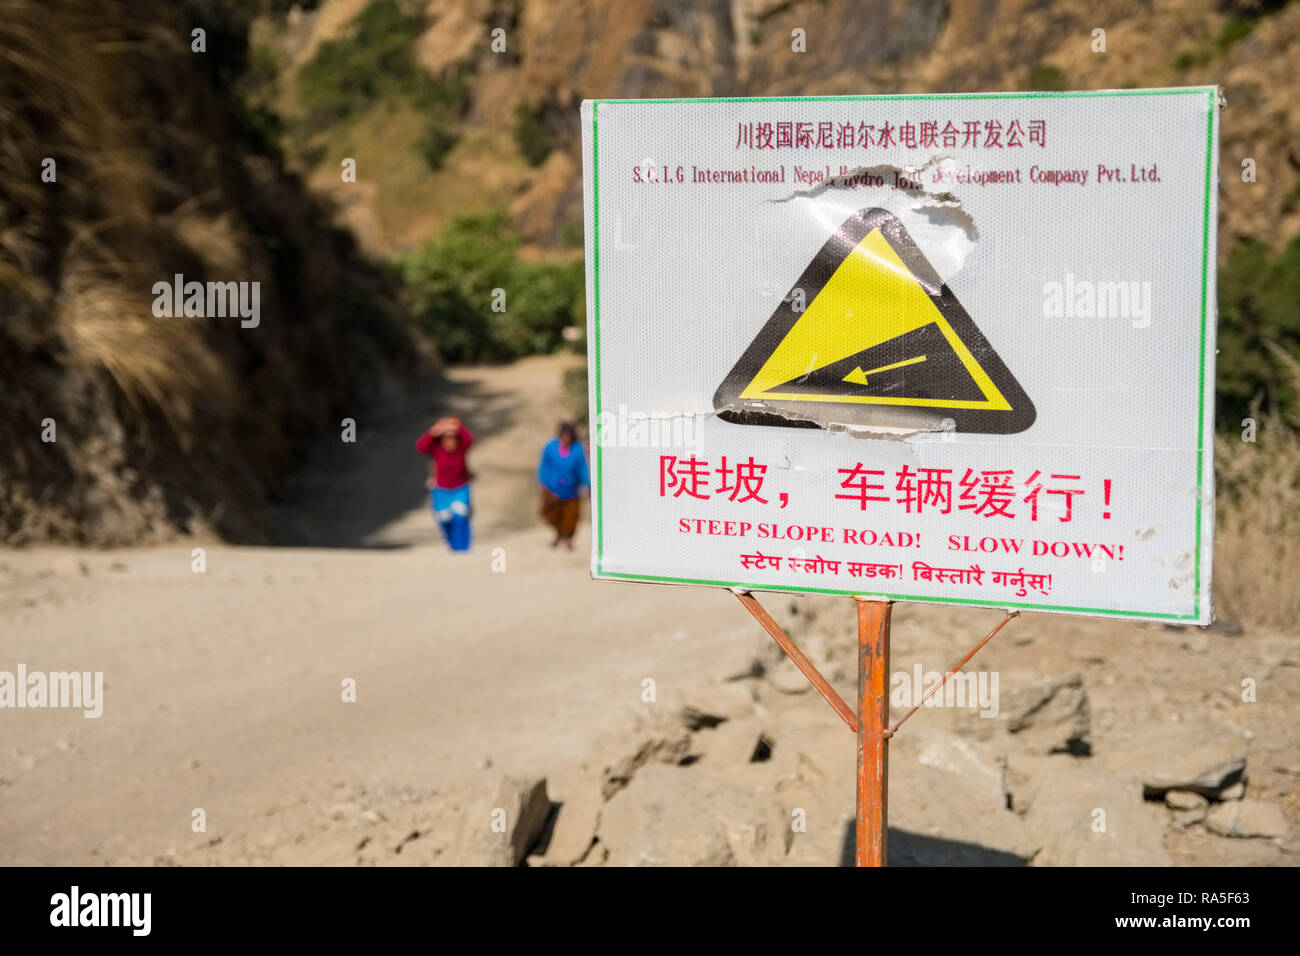 Road sign in Chinese on Chinese funded road building project, Nepal Himalayas Stock Photo